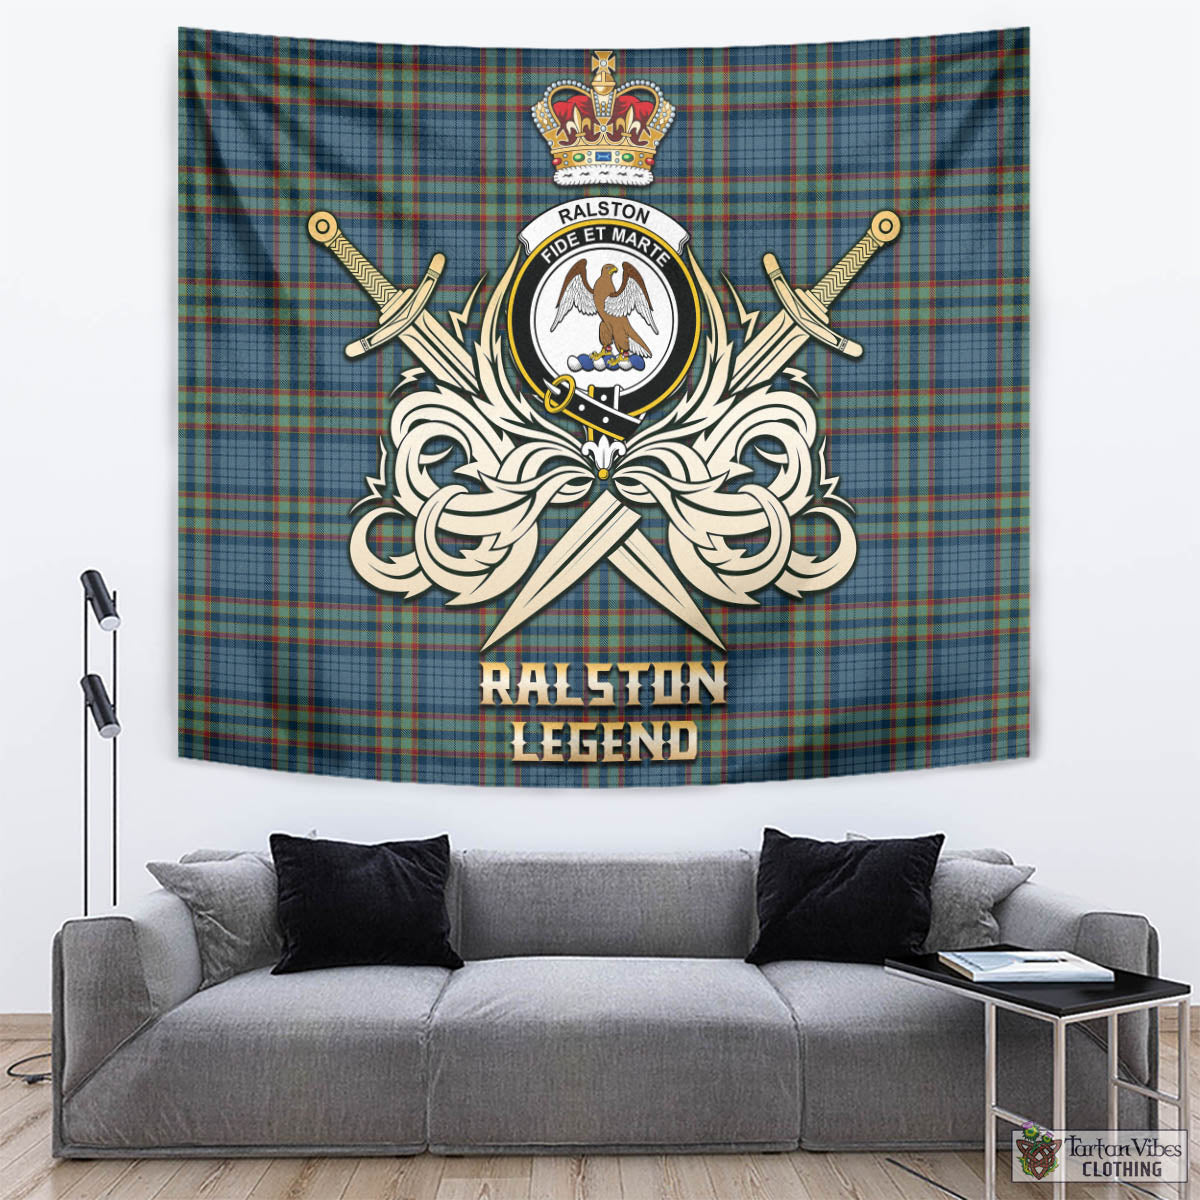 Tartan Vibes Clothing Ralston UK Tartan Tapestry with Clan Crest and the Golden Sword of Courageous Legacy